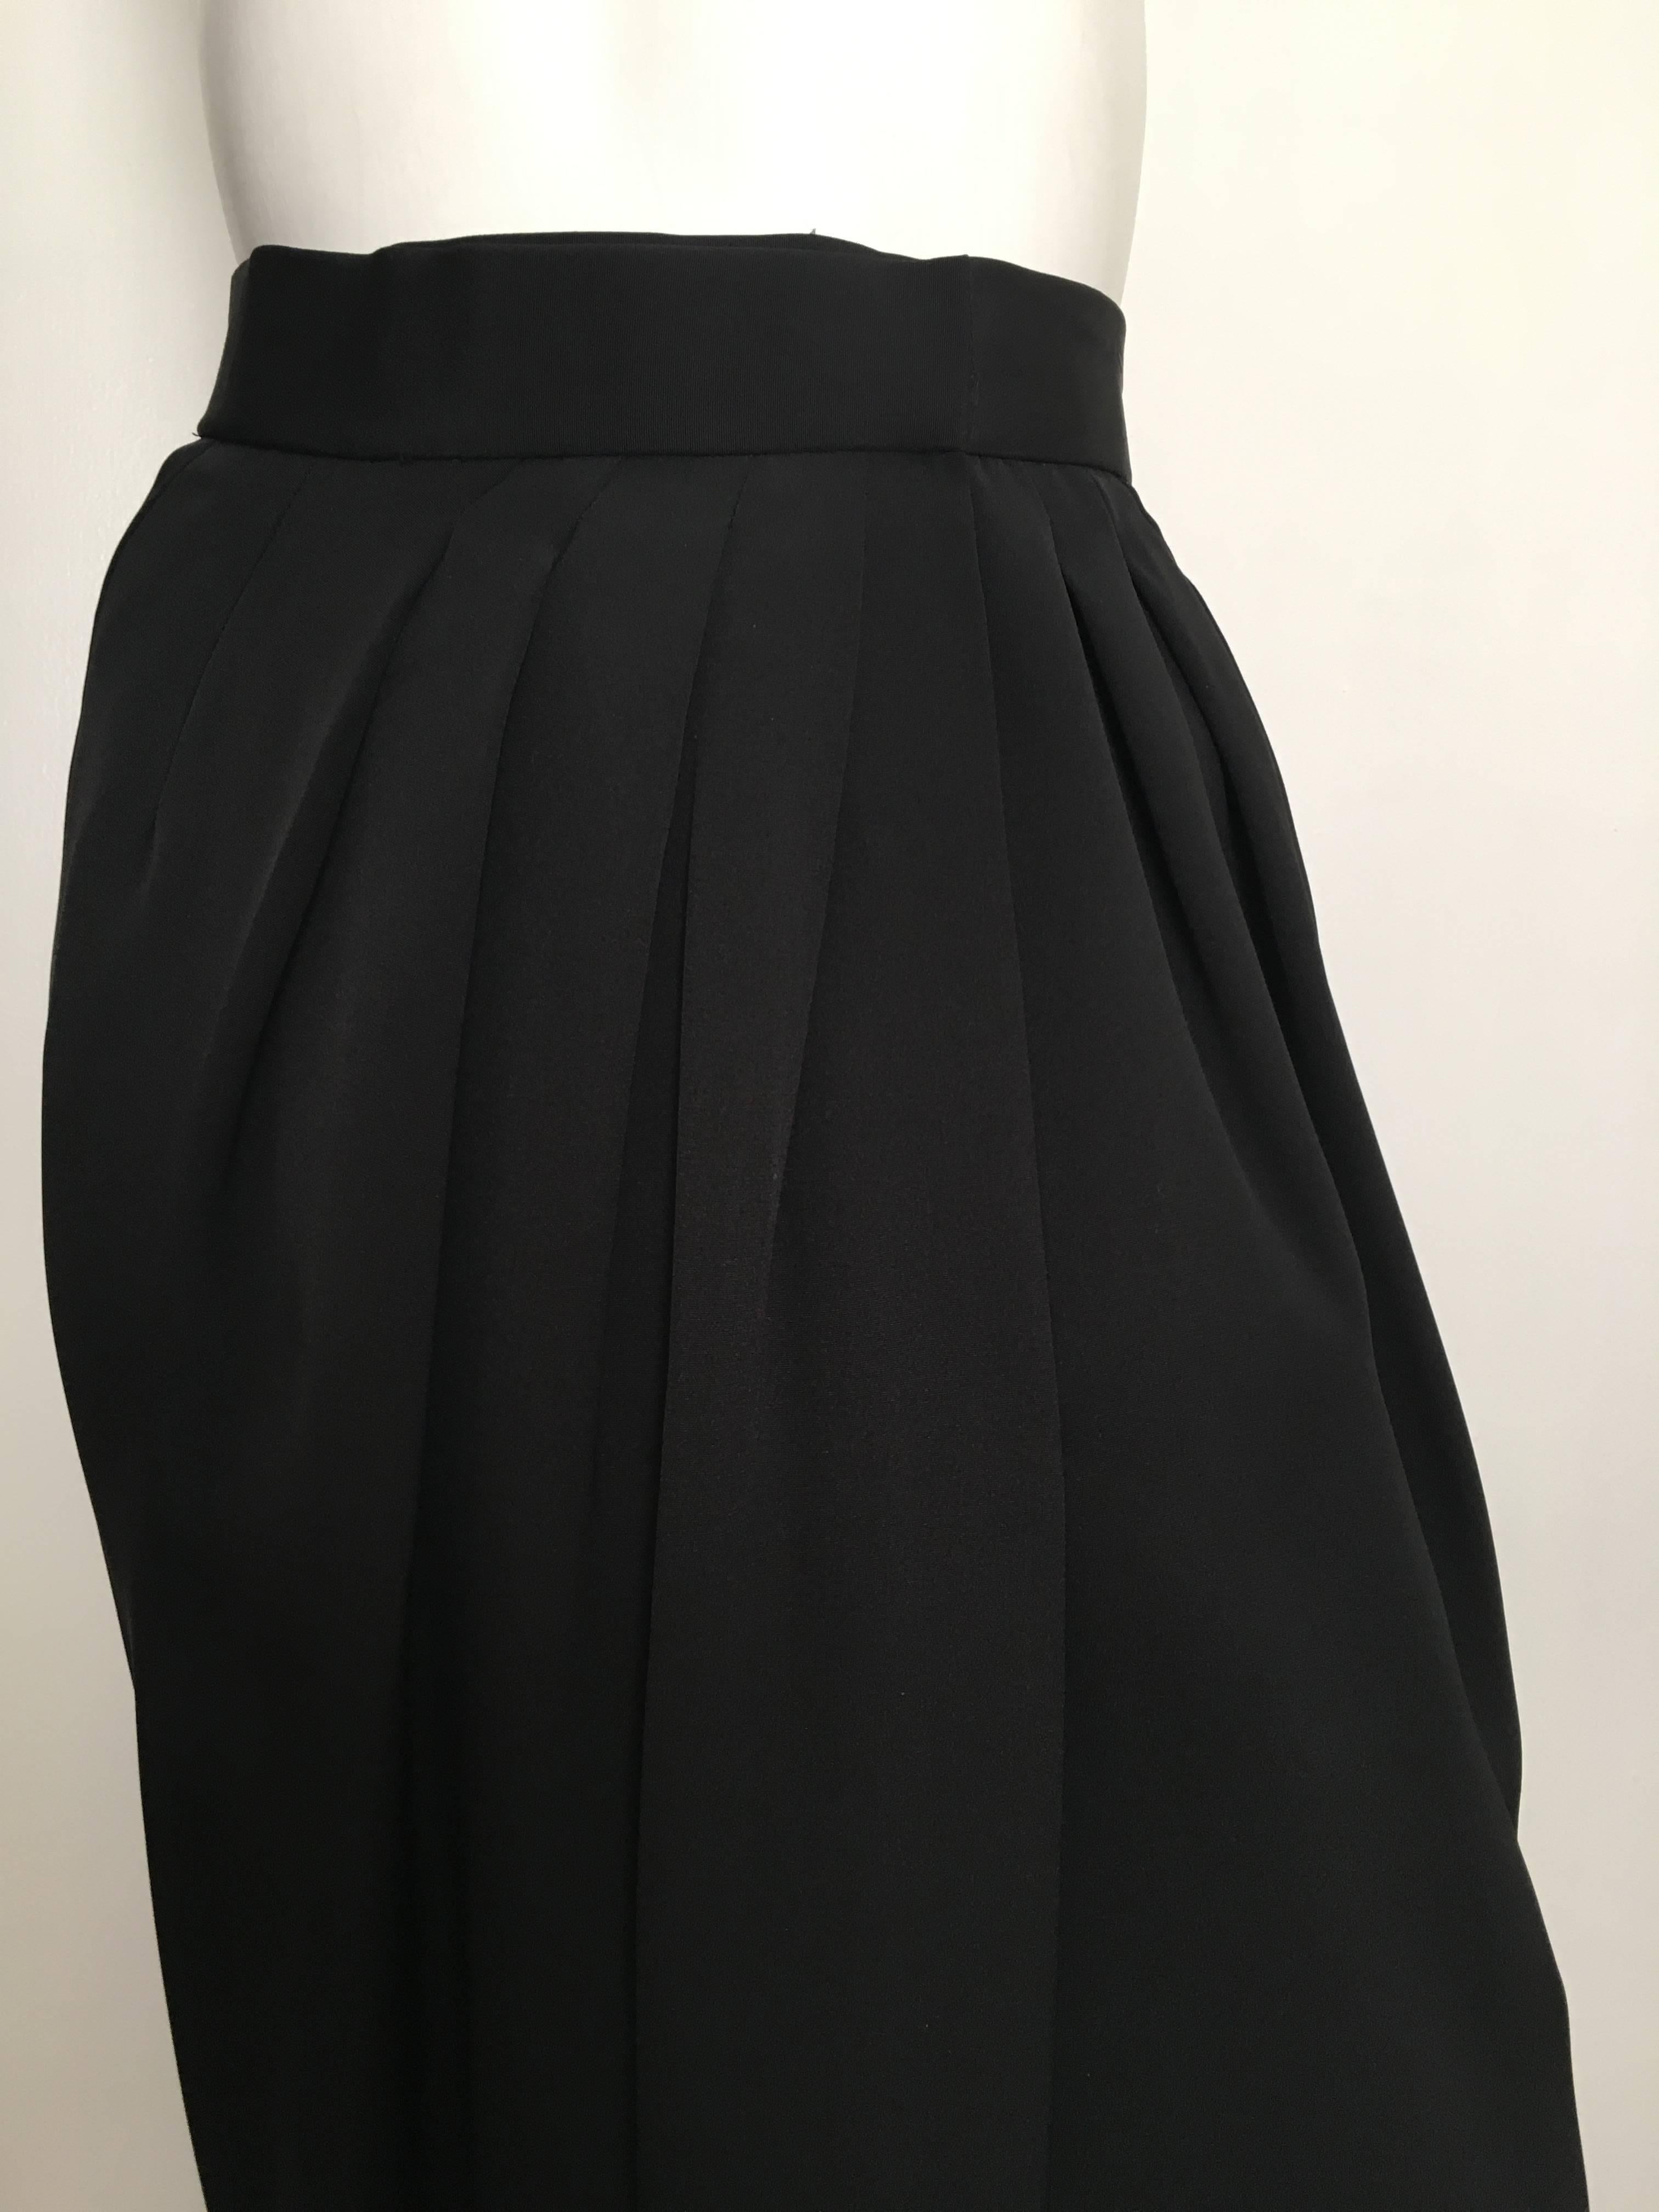 Carolyne Roehm 1980s long black evening wrap skirt is a vintage size 8 but fits like a modern USA size 4.  Ladies please use your measuring tape so you can properly measure your waistline to make certain this will fit you to perfection.  Classic &